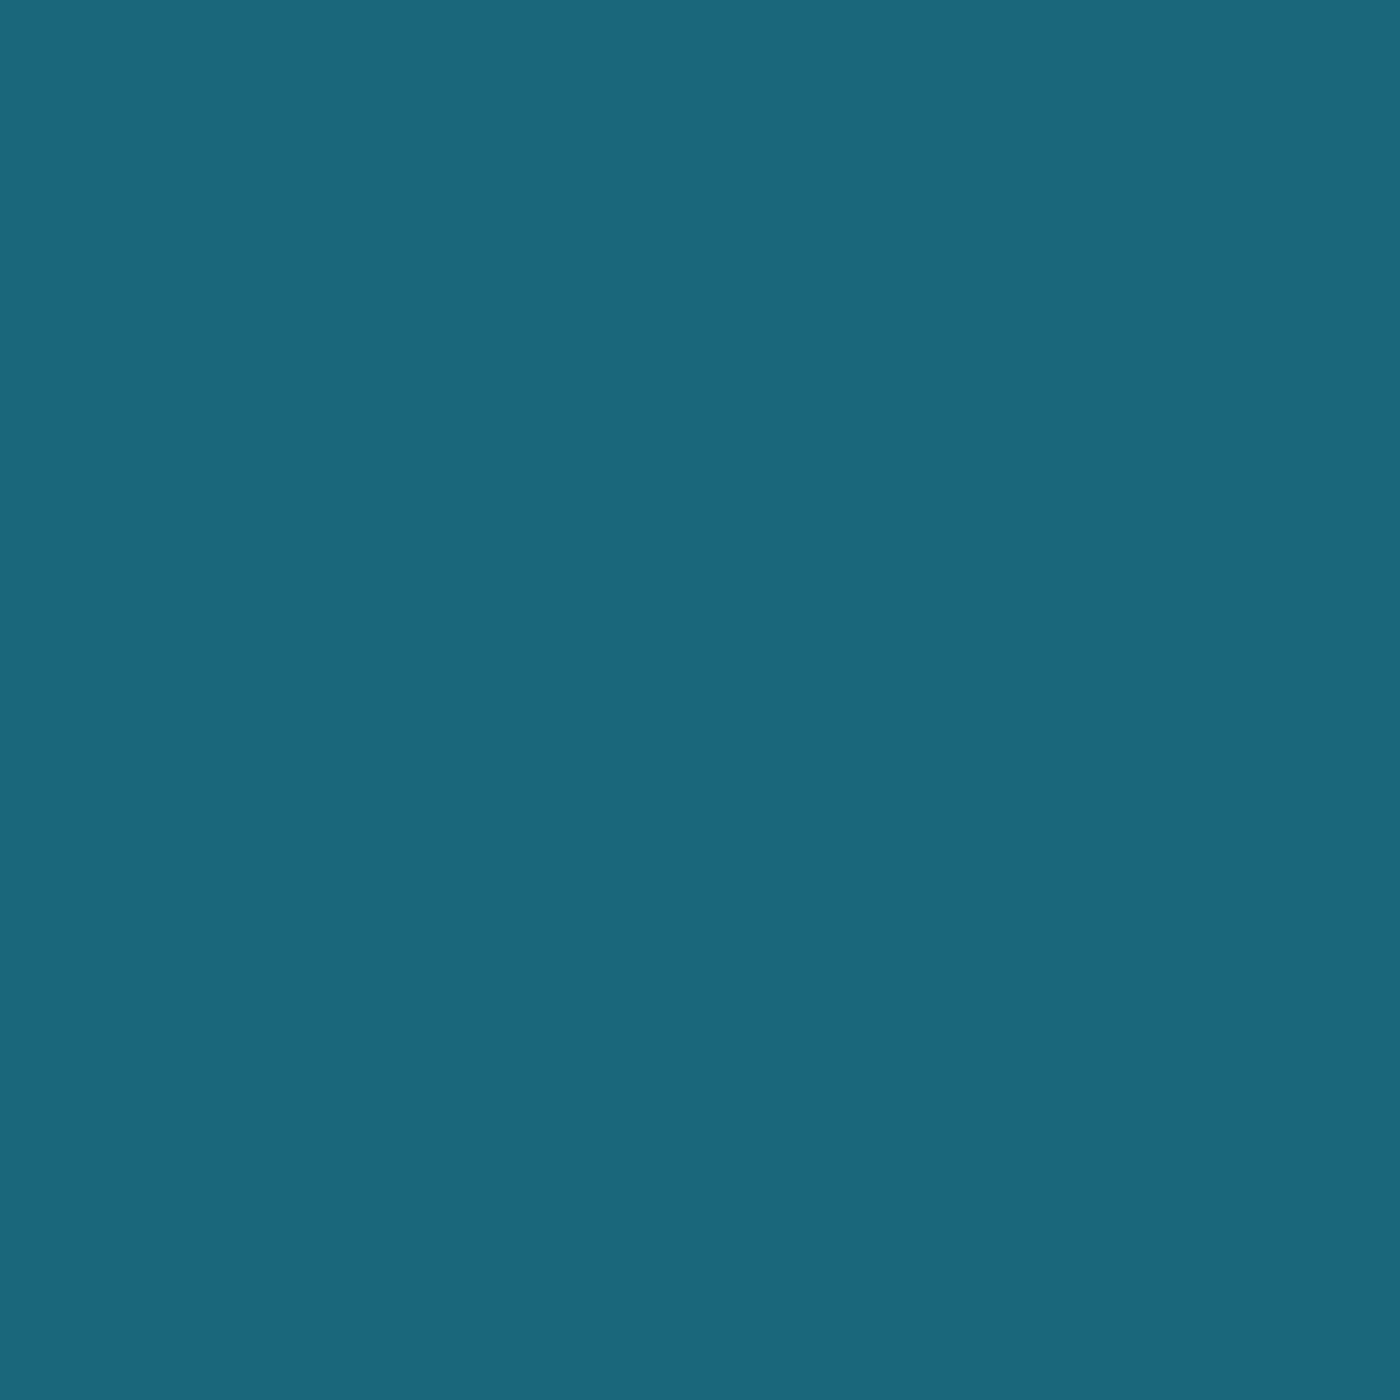 DARK SEAS 12x12 smooth cardstock - Bazzill Smoothies Collection - deep teal blue